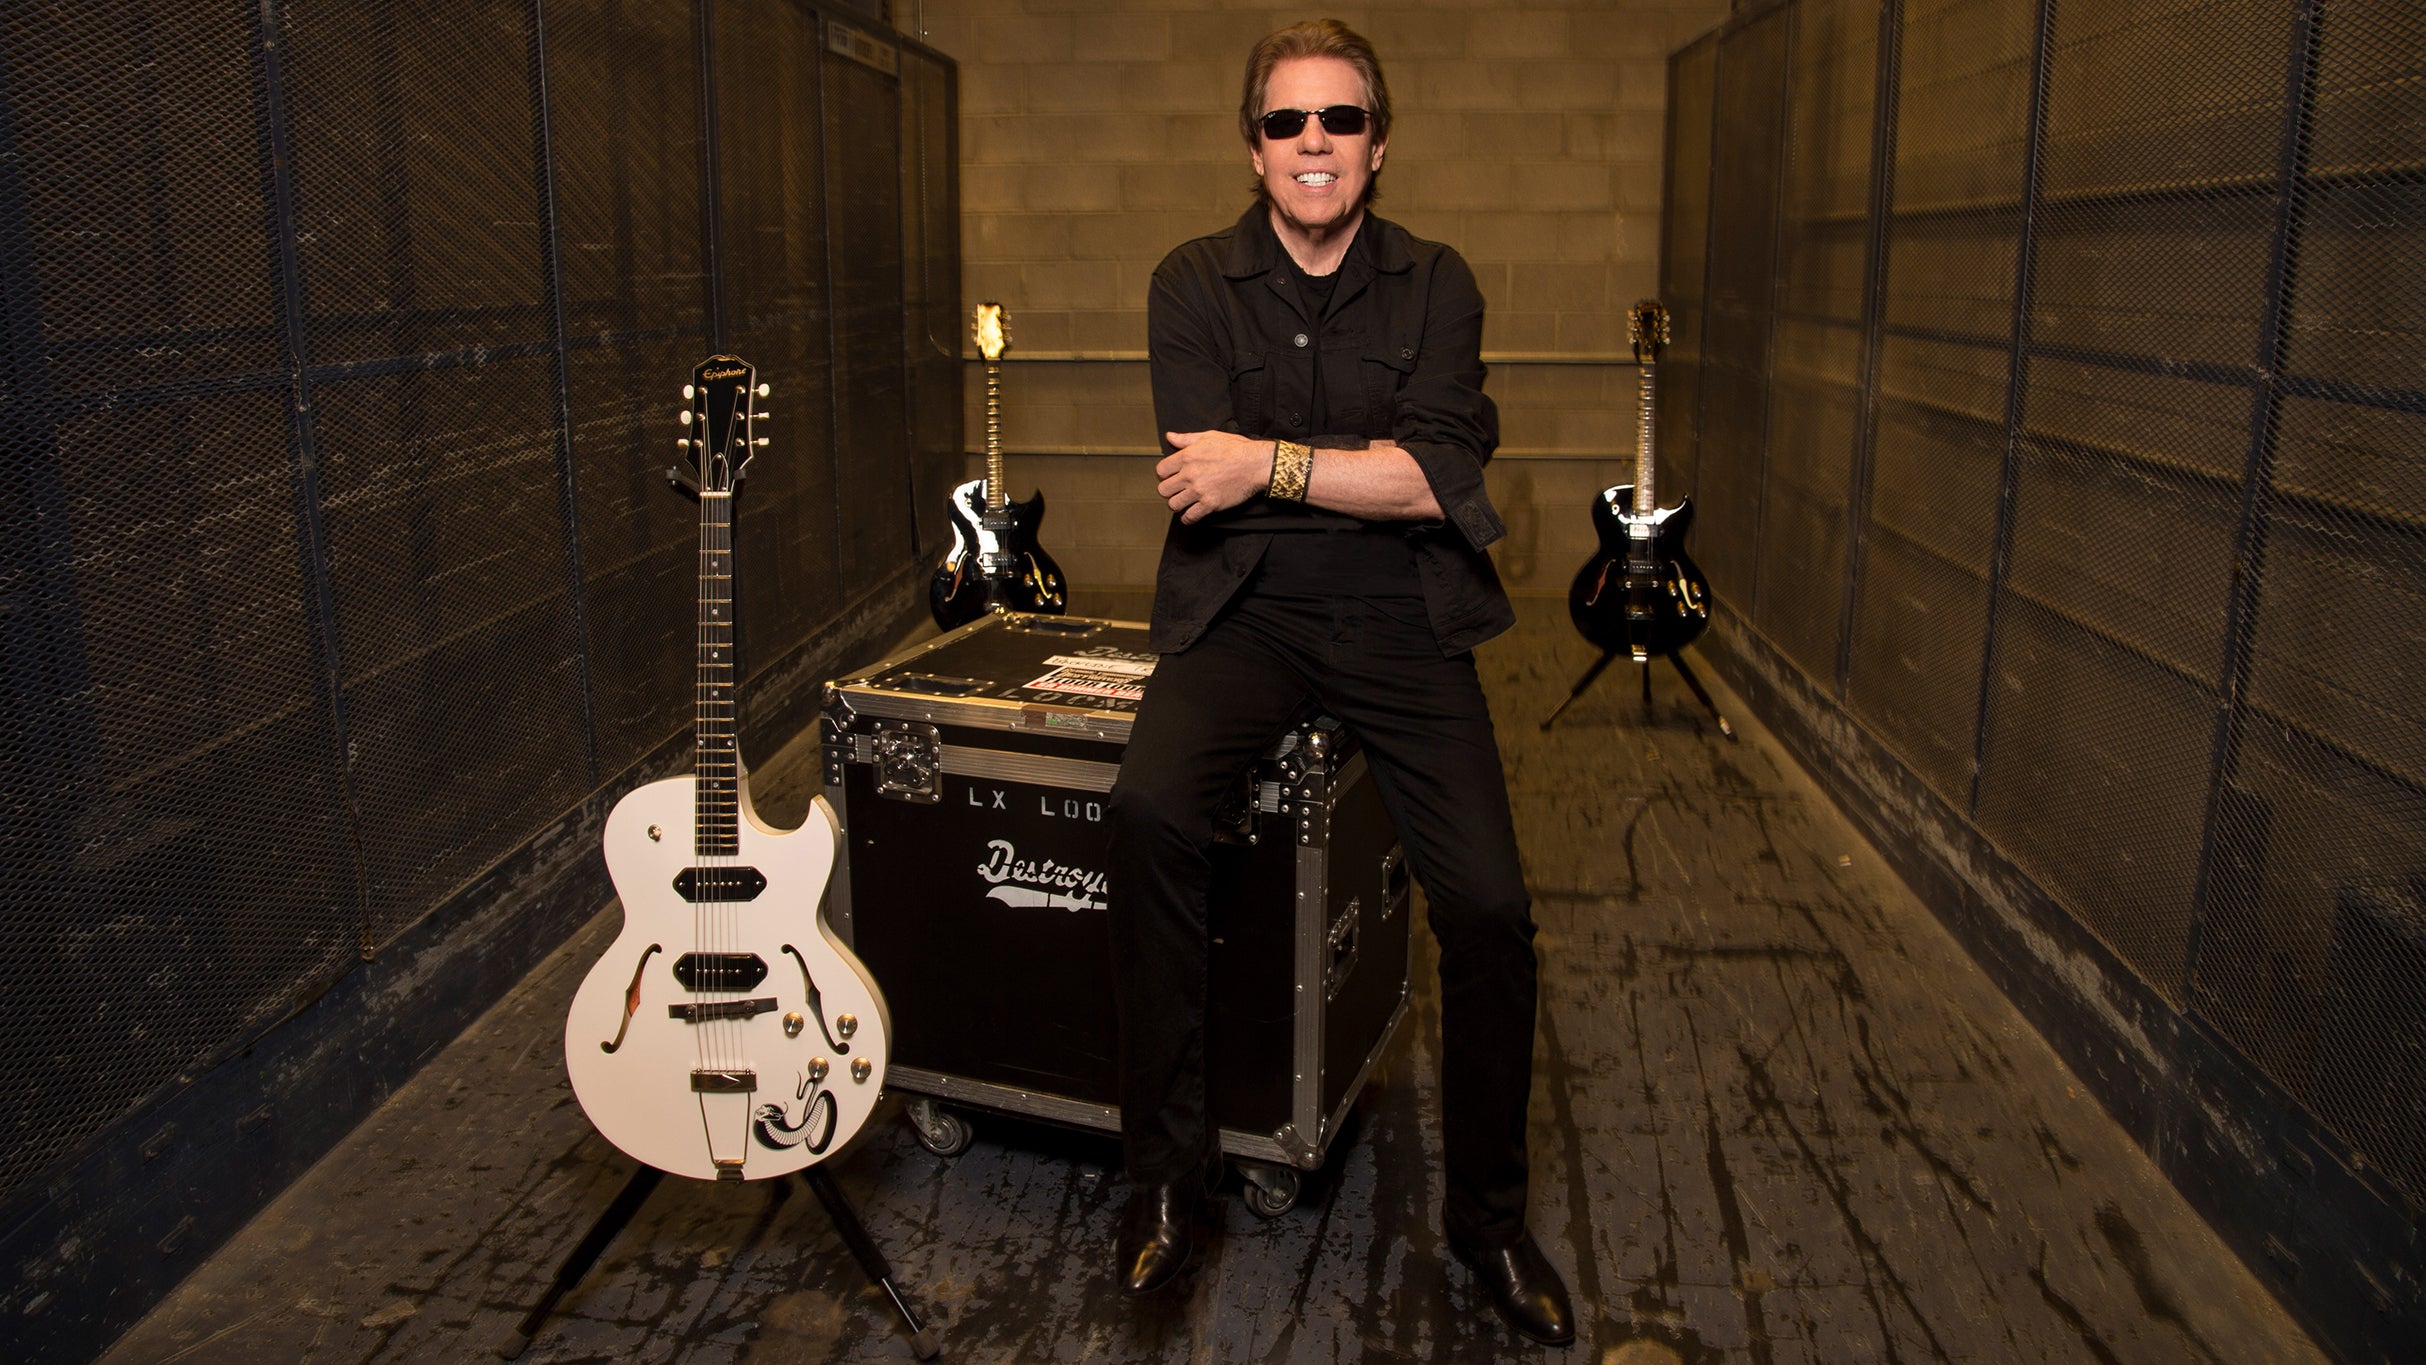 George Thorogood & The Destroyers - 50 Years of Rock! presale code for show tickets in Vancouver, BC (Commodore Ballroom)